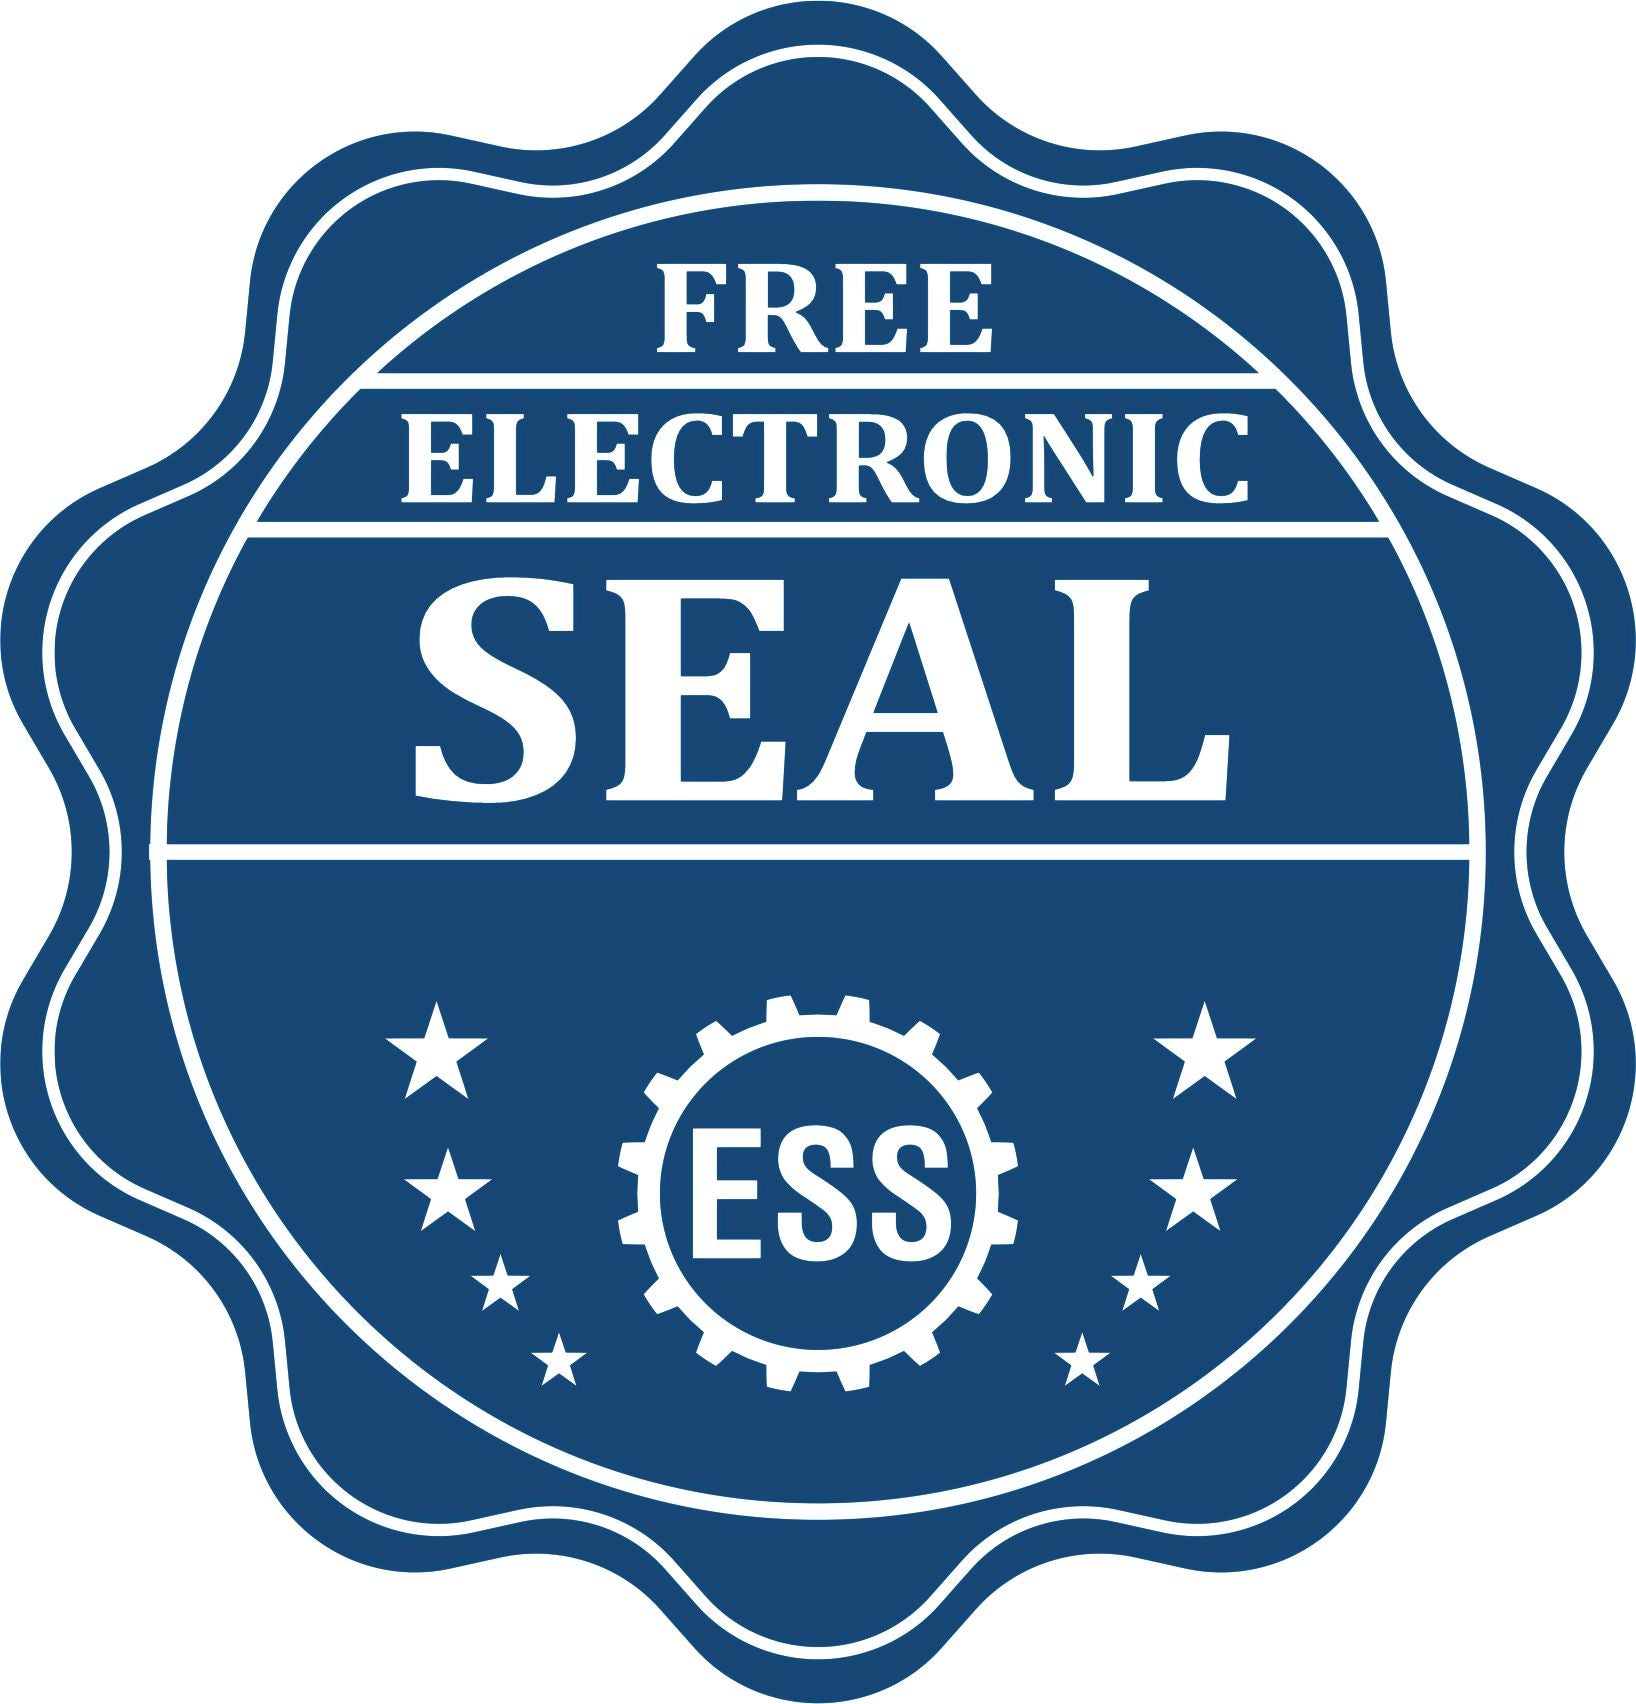 A badge showing a free electronic seal for the Wisconsin Geologist Desk Seal with stars and the ESS gear on the emblem.